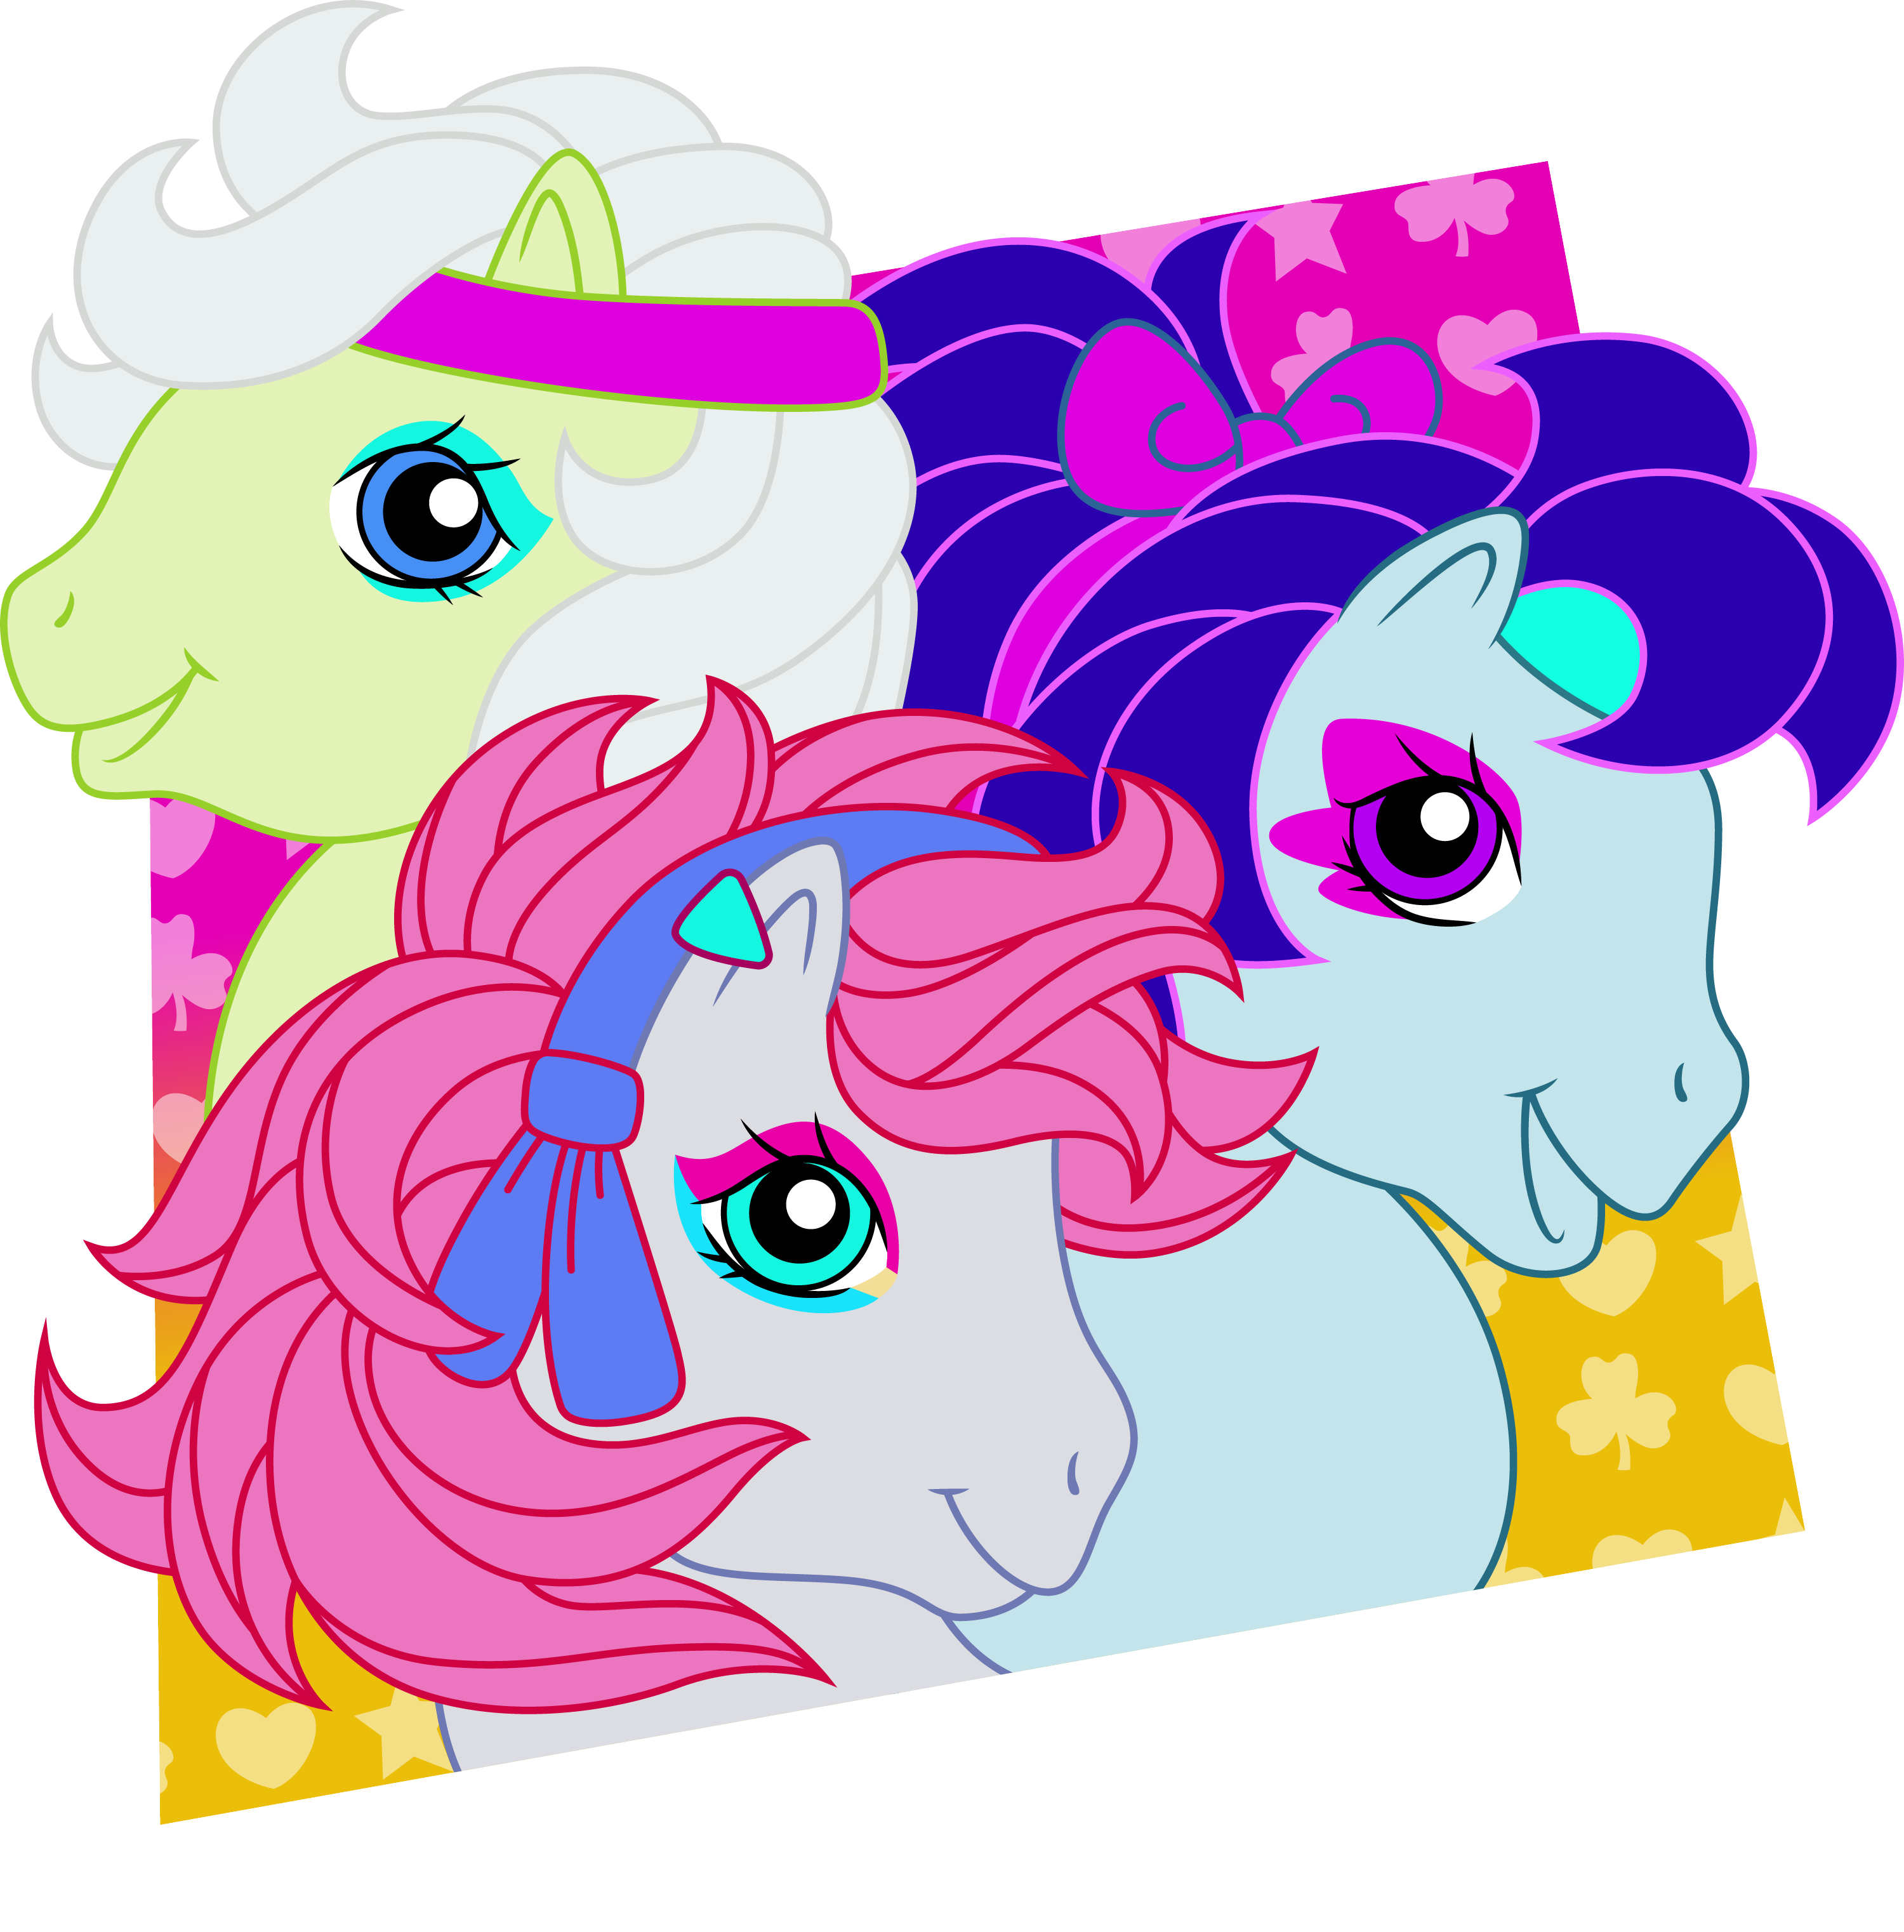 3140116__safe_artist-colon-cloudy+glow_blue+belle+g5_minty+g5_snuzzle+g5_earth+pony_pony_bridlewoodstock_g1_g5_my+little+pony-colon-+make+your+mark_my+little+po.png